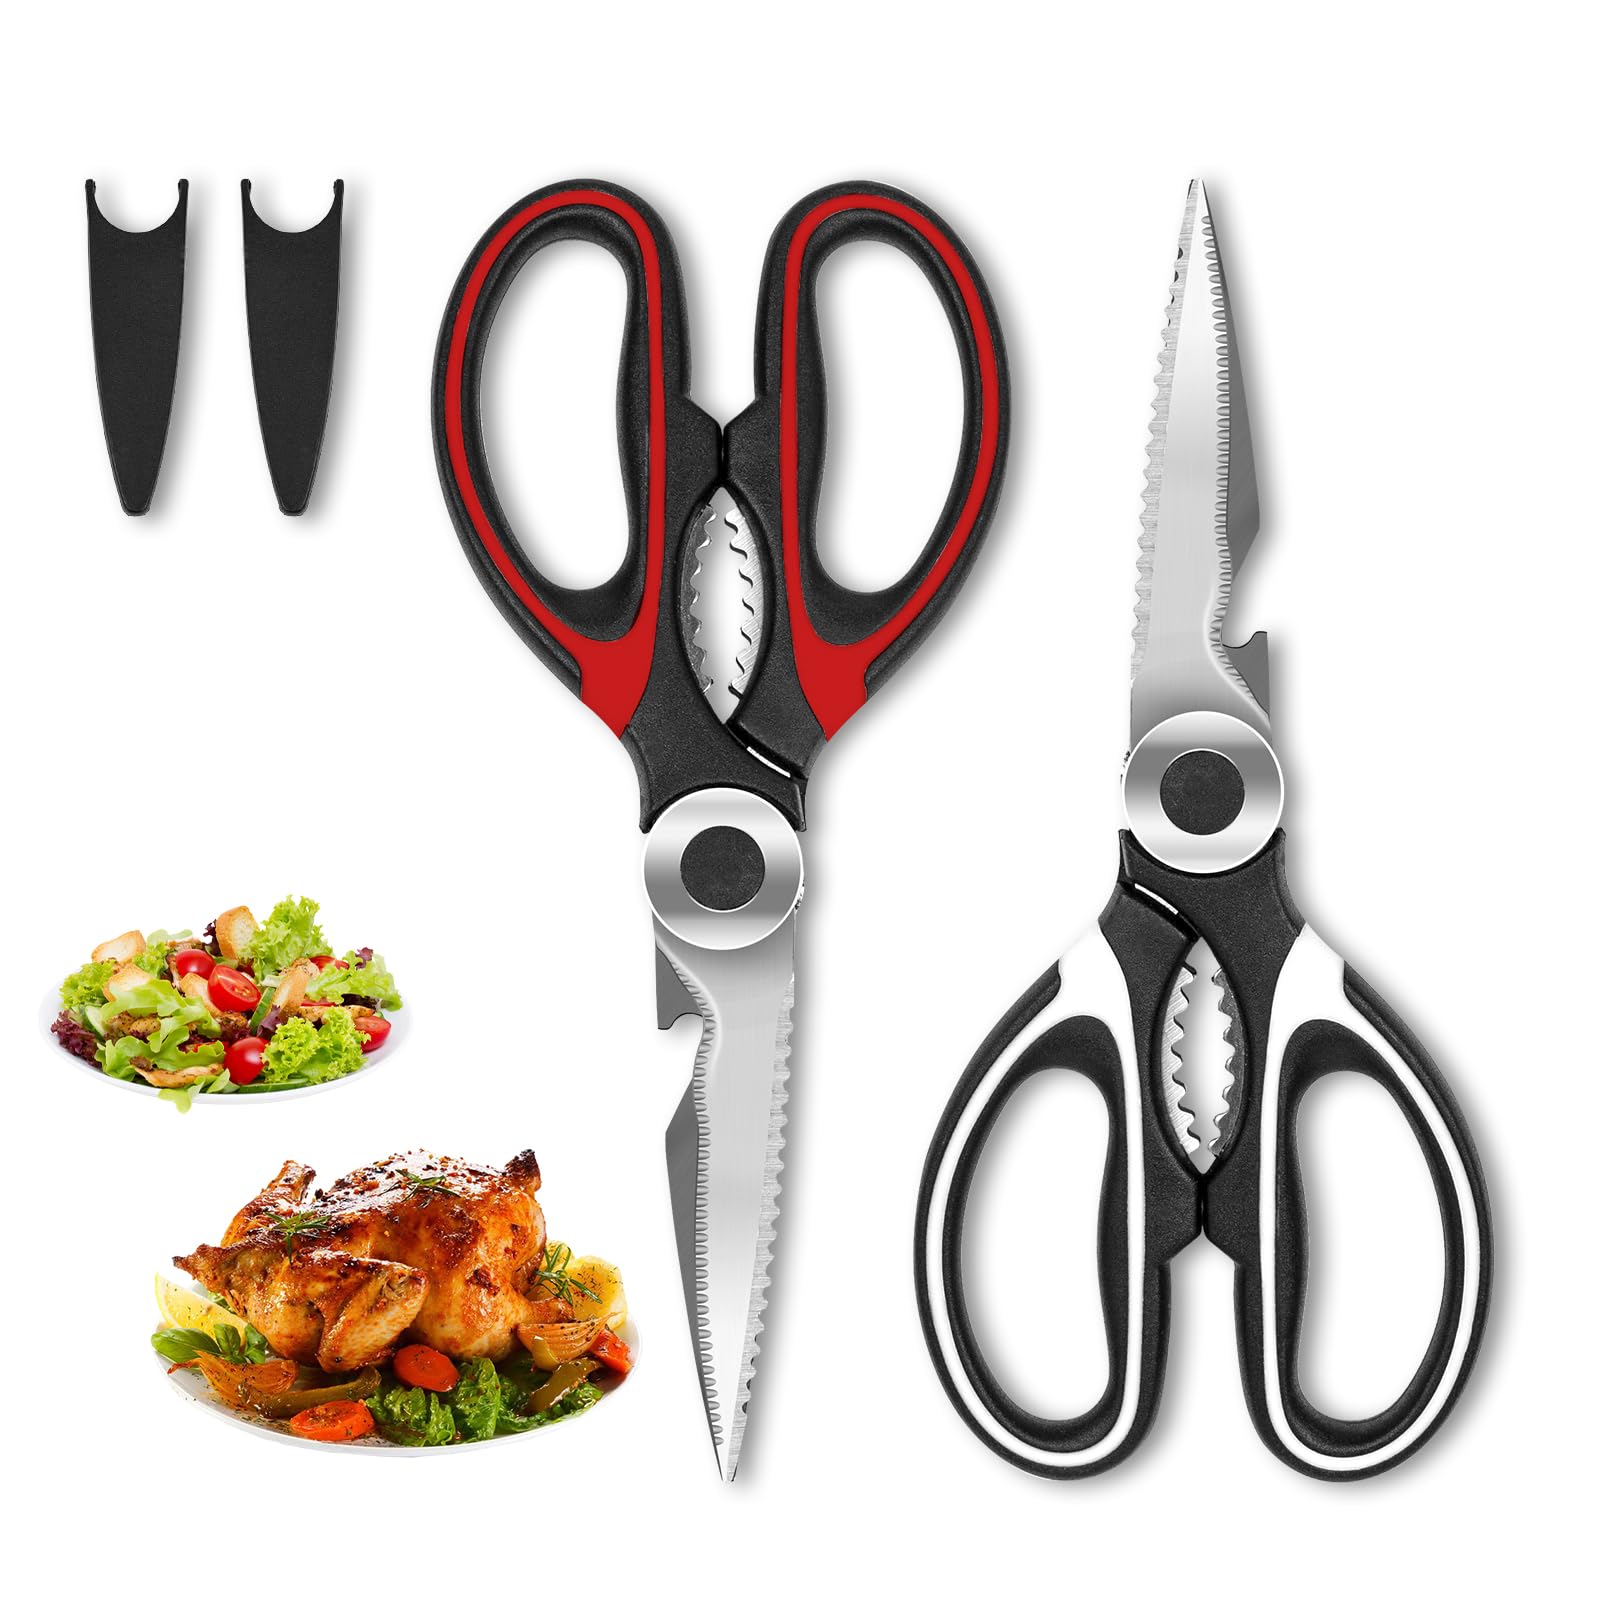 SZHLUX 2-Pack Kitchen Scissors Heavy Duty, Premium Sharp Kitchen Shears for Food, Fish, Meat, Bones, Poultry and Vegetables with Strong Stainless Steel Blades Multi Purpose Cooking Scissors